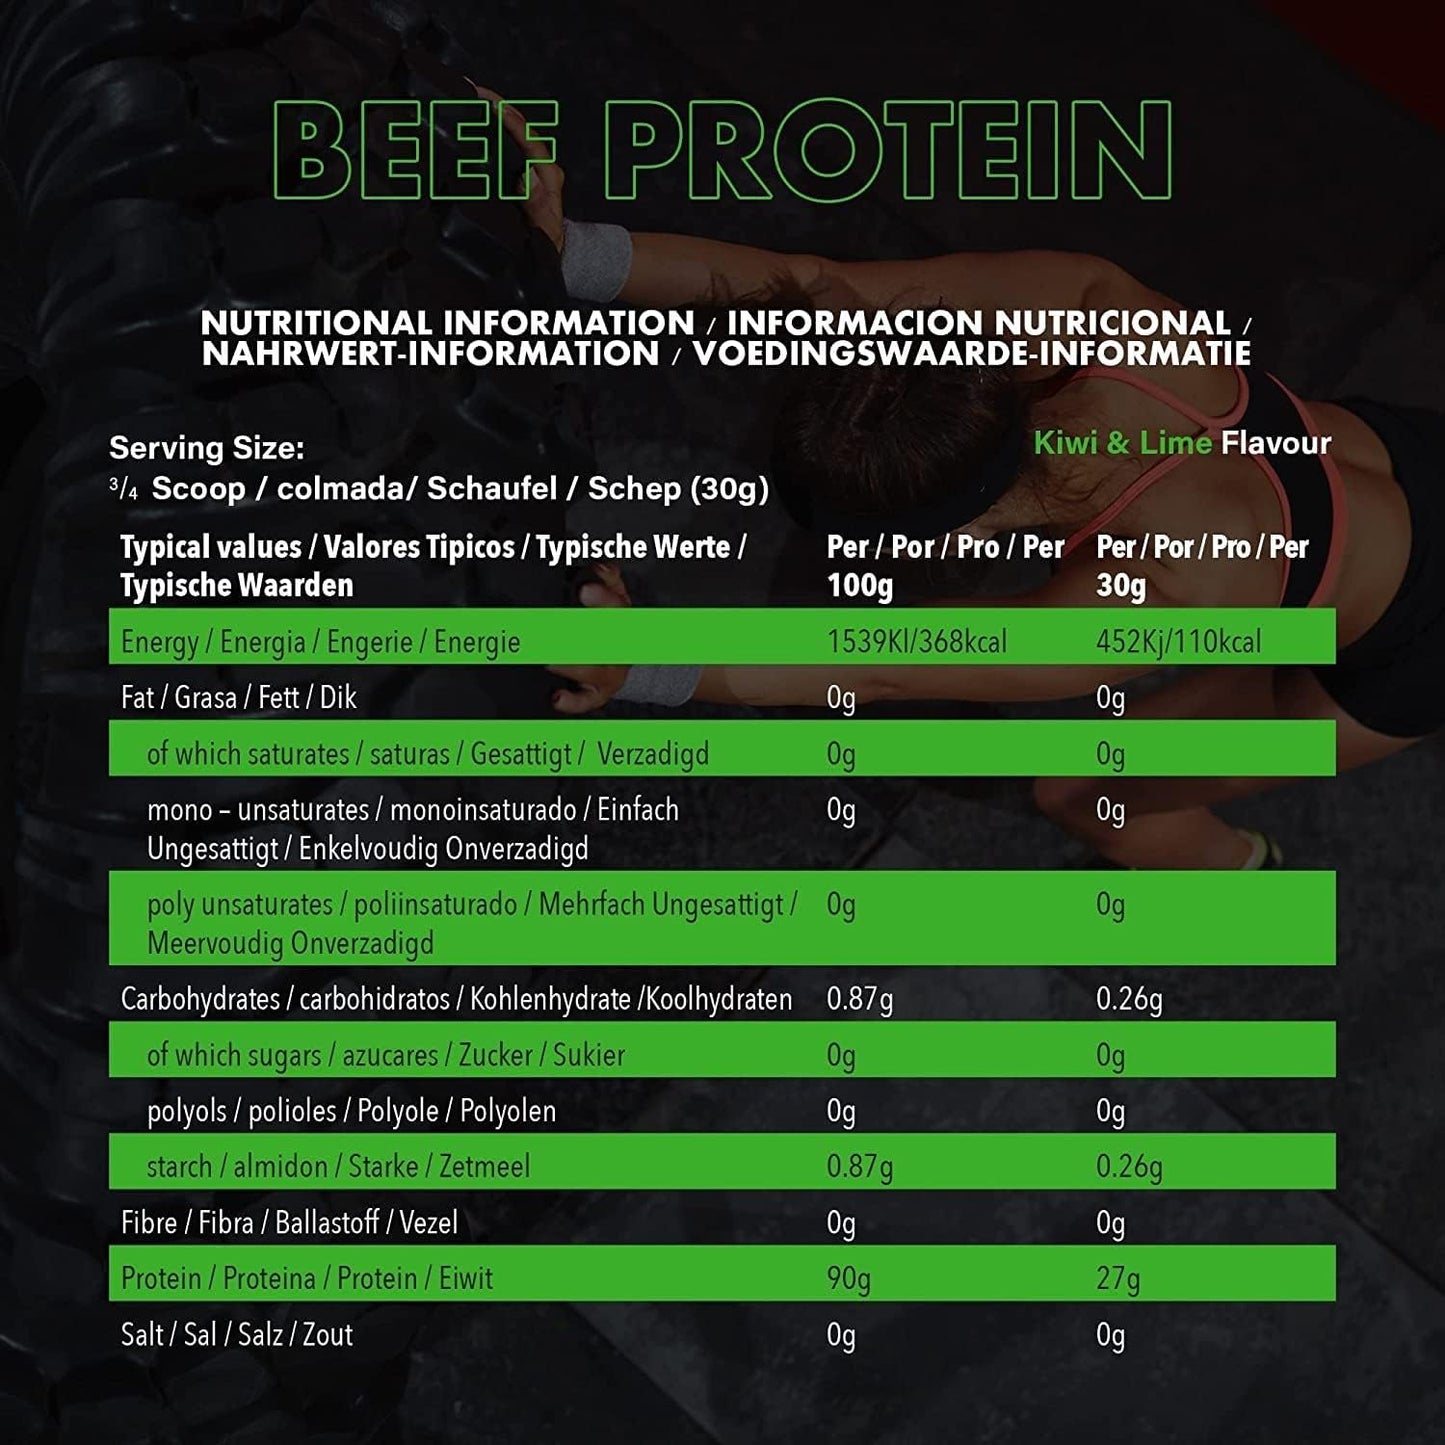 NXT - Beef Protein Isolate Kiwi & Lime 1.8 kg